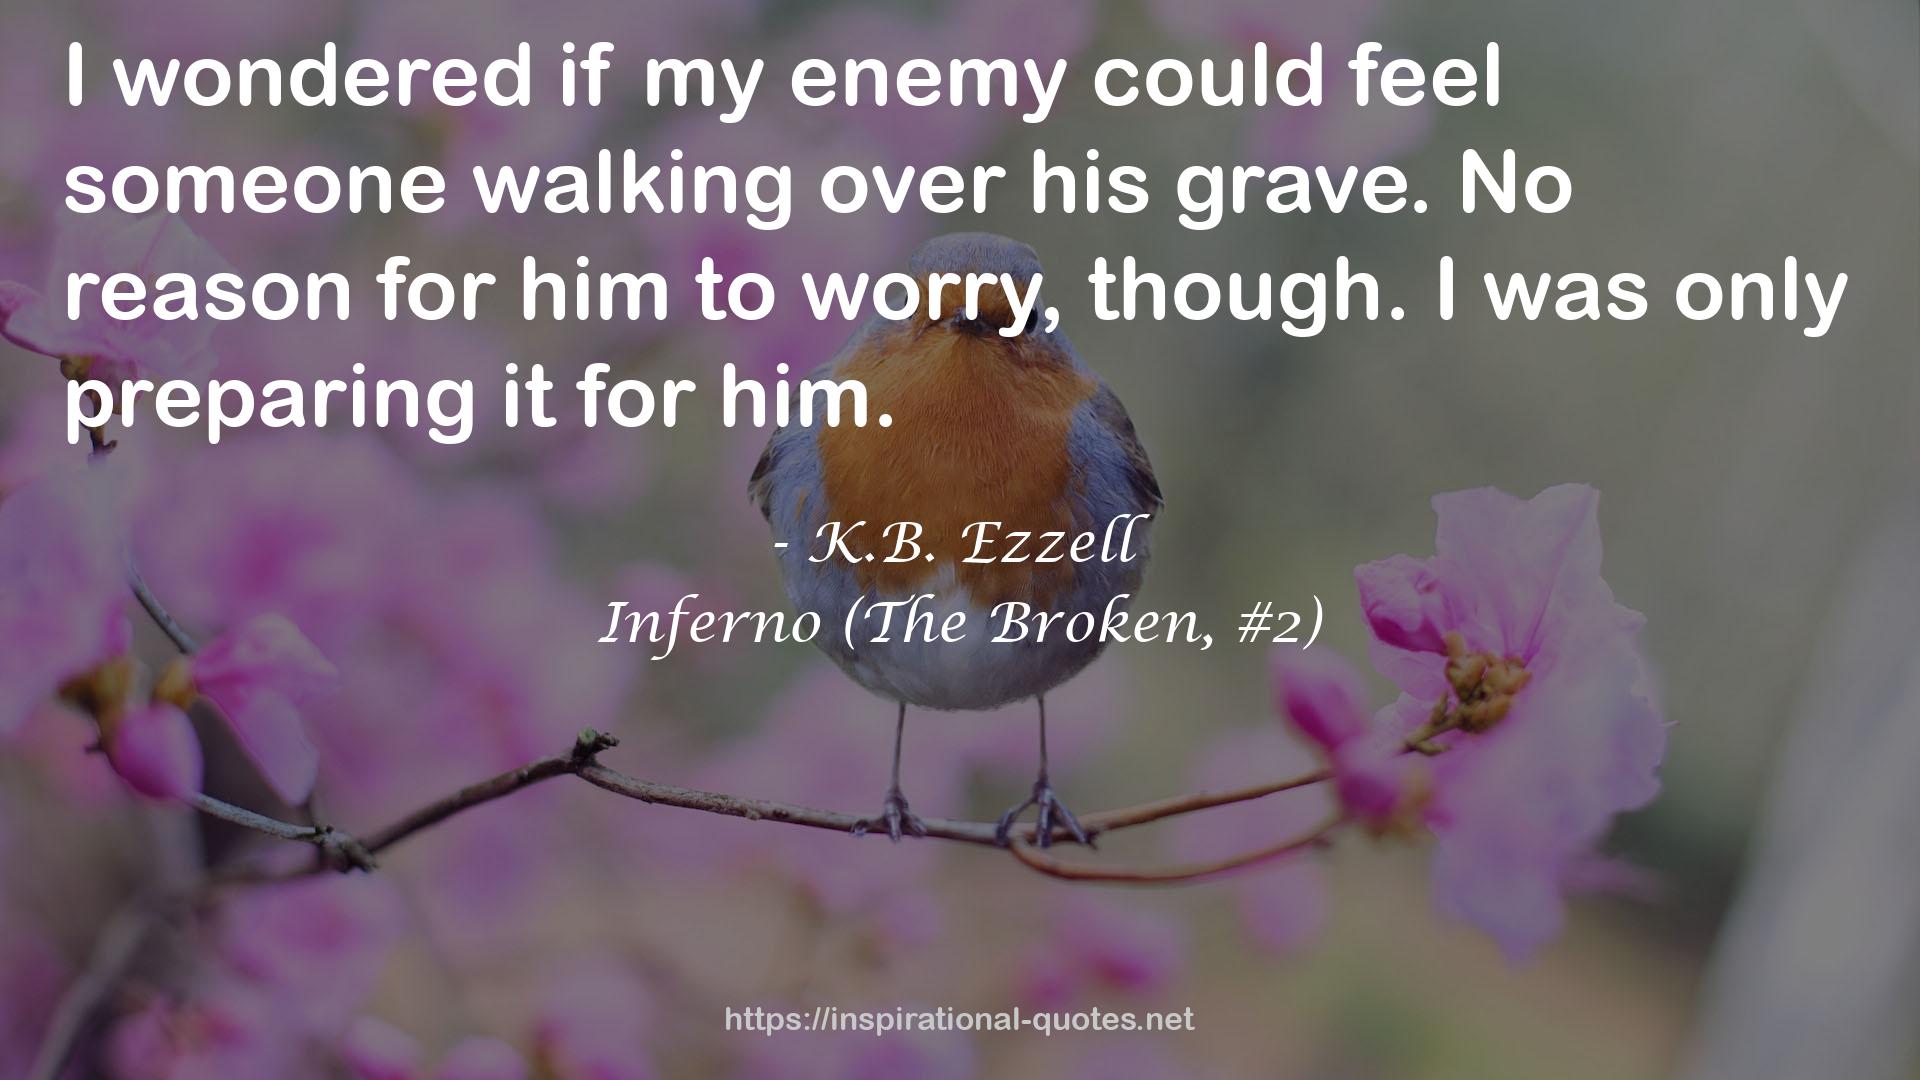 Inferno (The Broken, #2) QUOTES